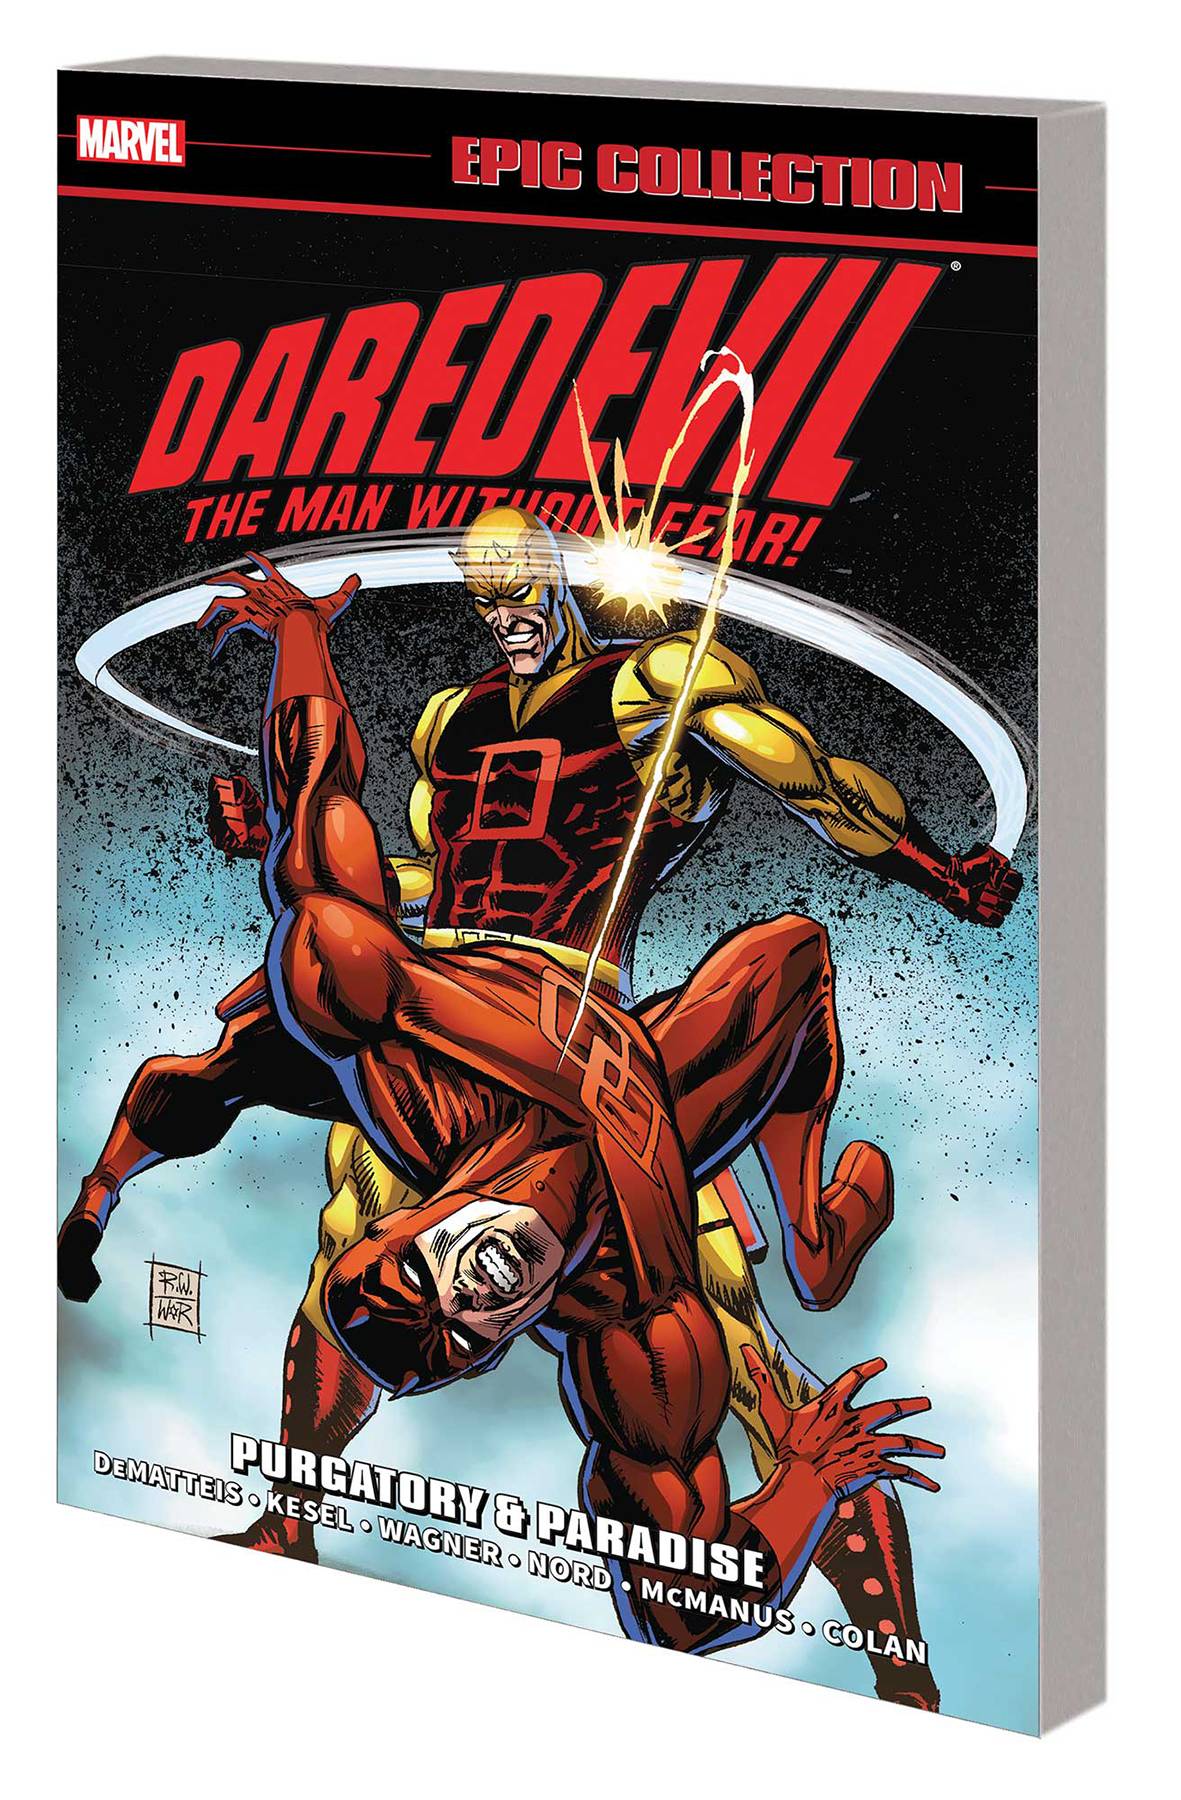 Daredevil Epic Collection Graphic Novel Volume 20 Purgatory and Paradise